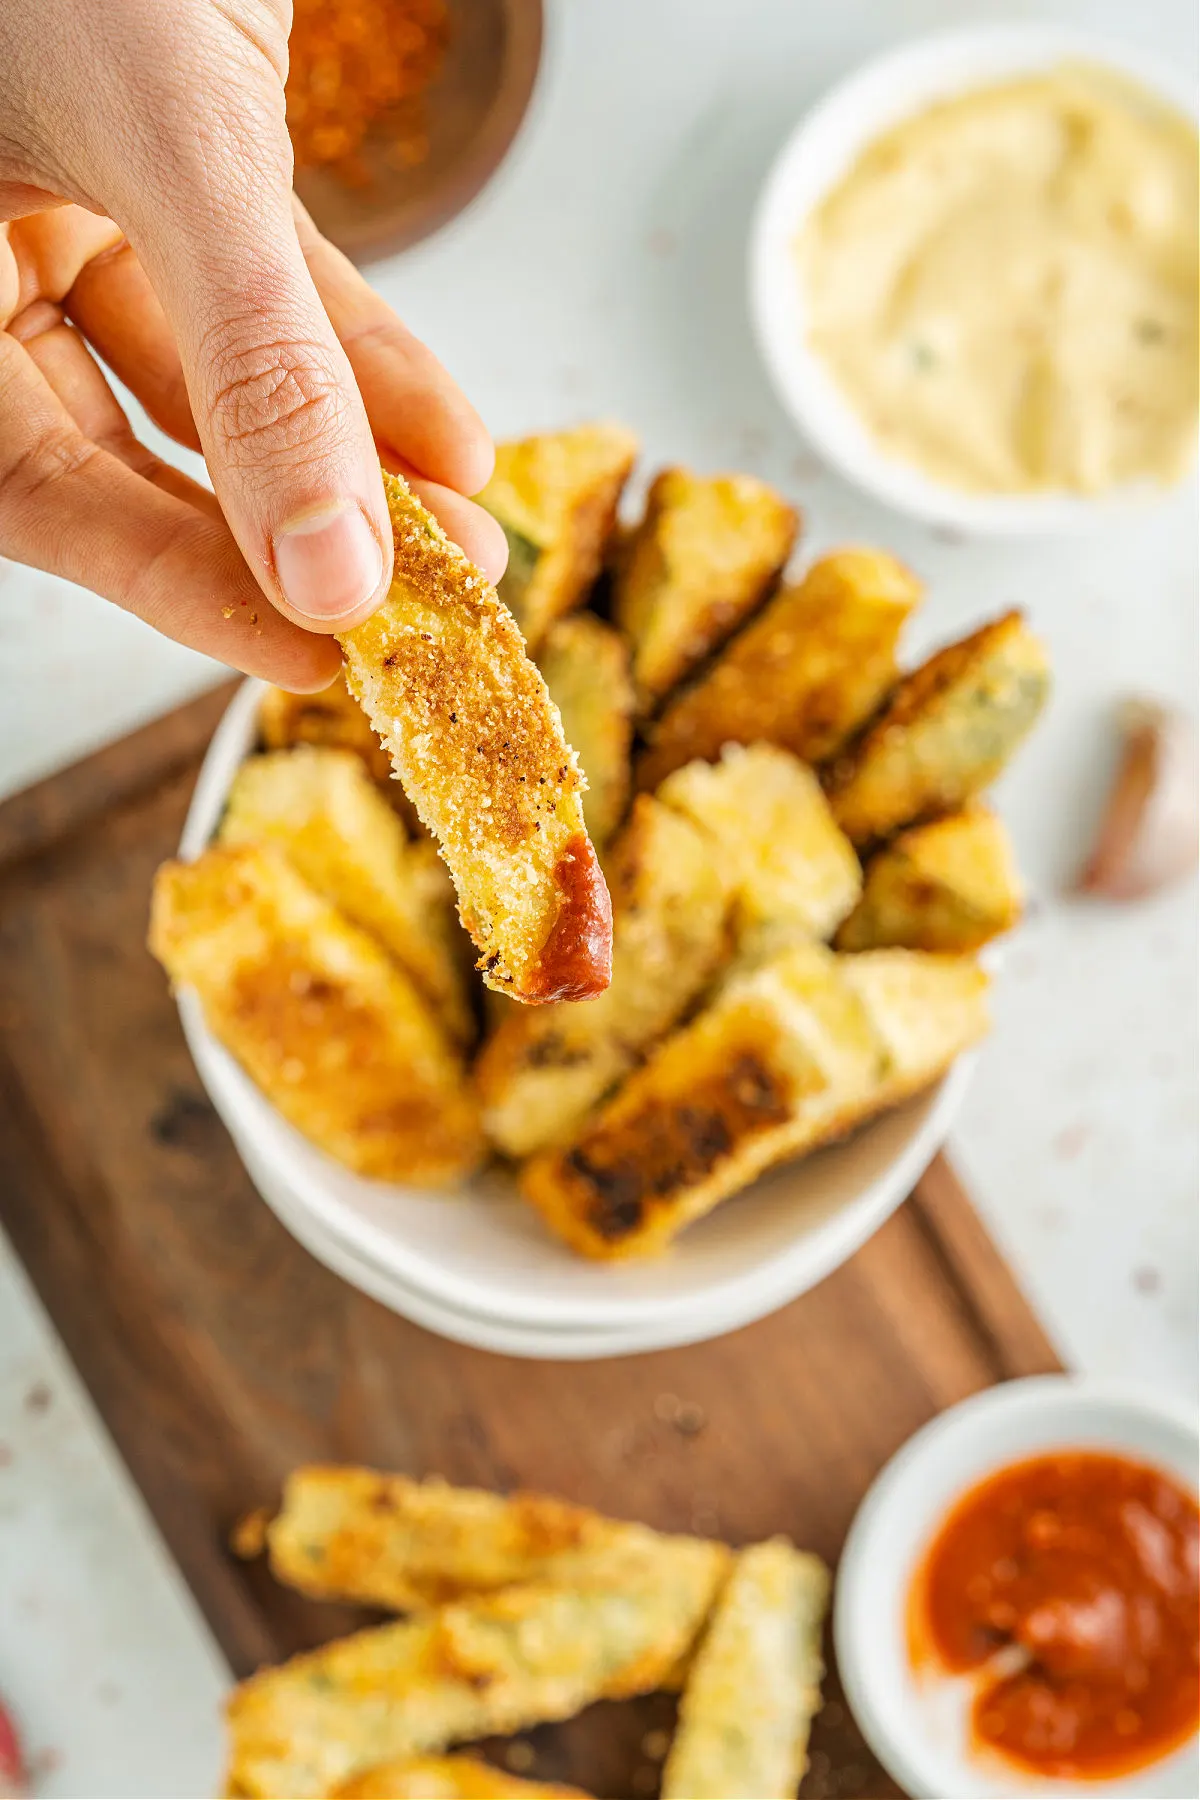 Zucchini fries dipped in sugar free ketchup.